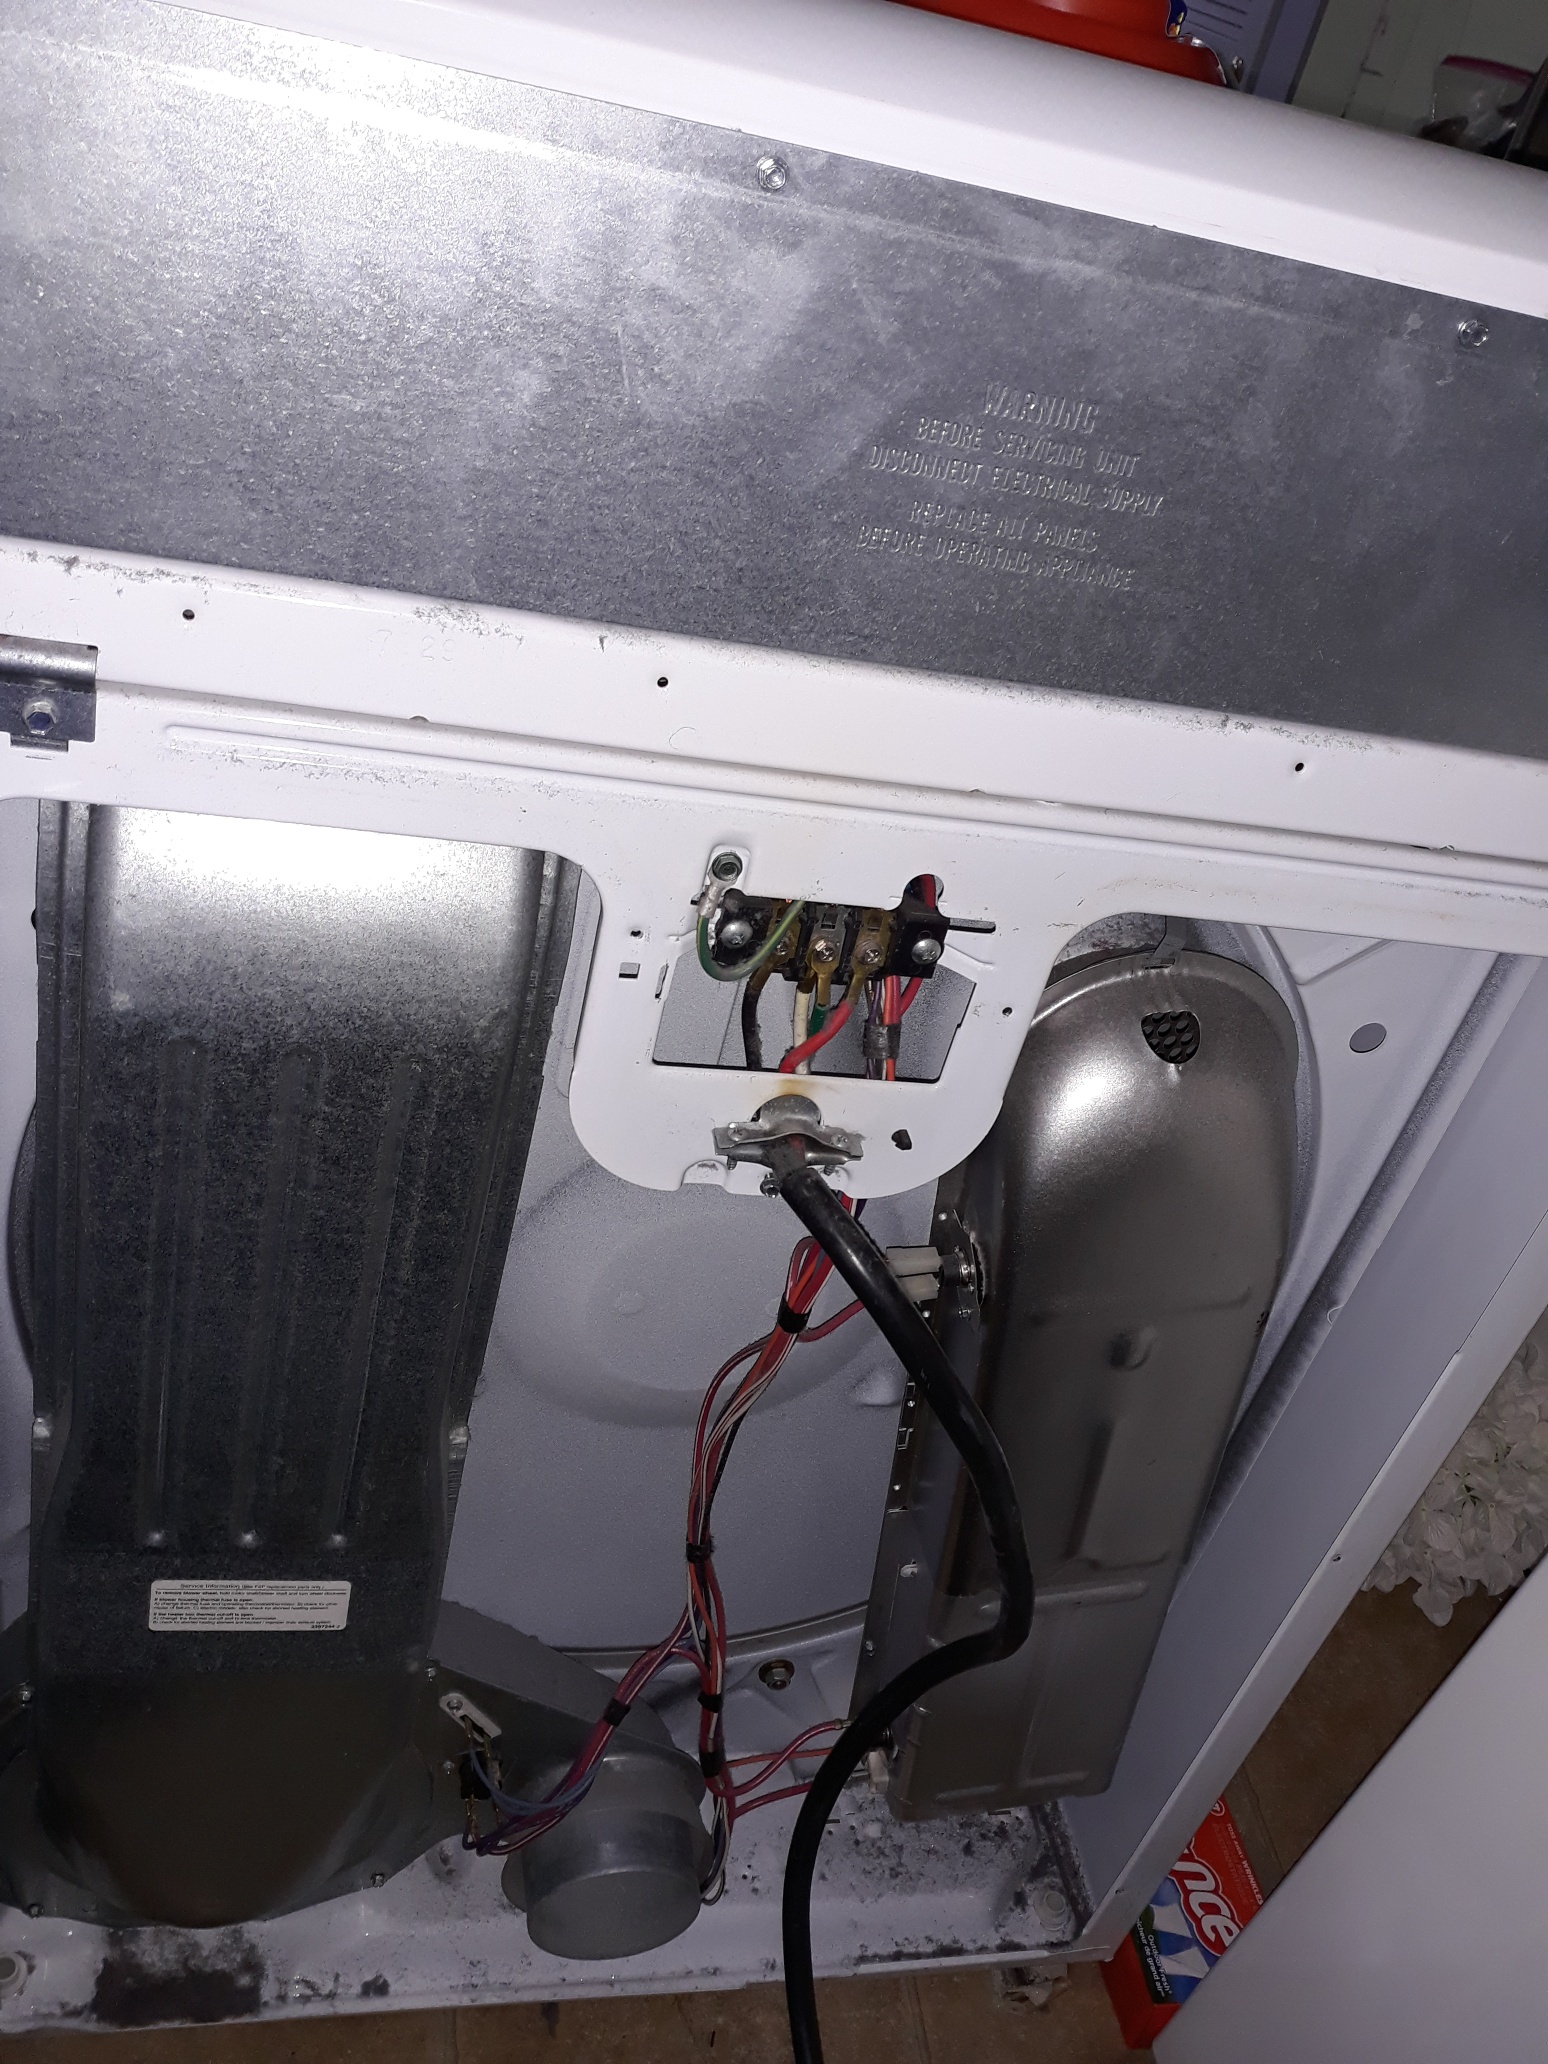 appliance repair dryer repair required replacement of the heating element assembly due to an open coil circuit milton ln oxford fl 34484